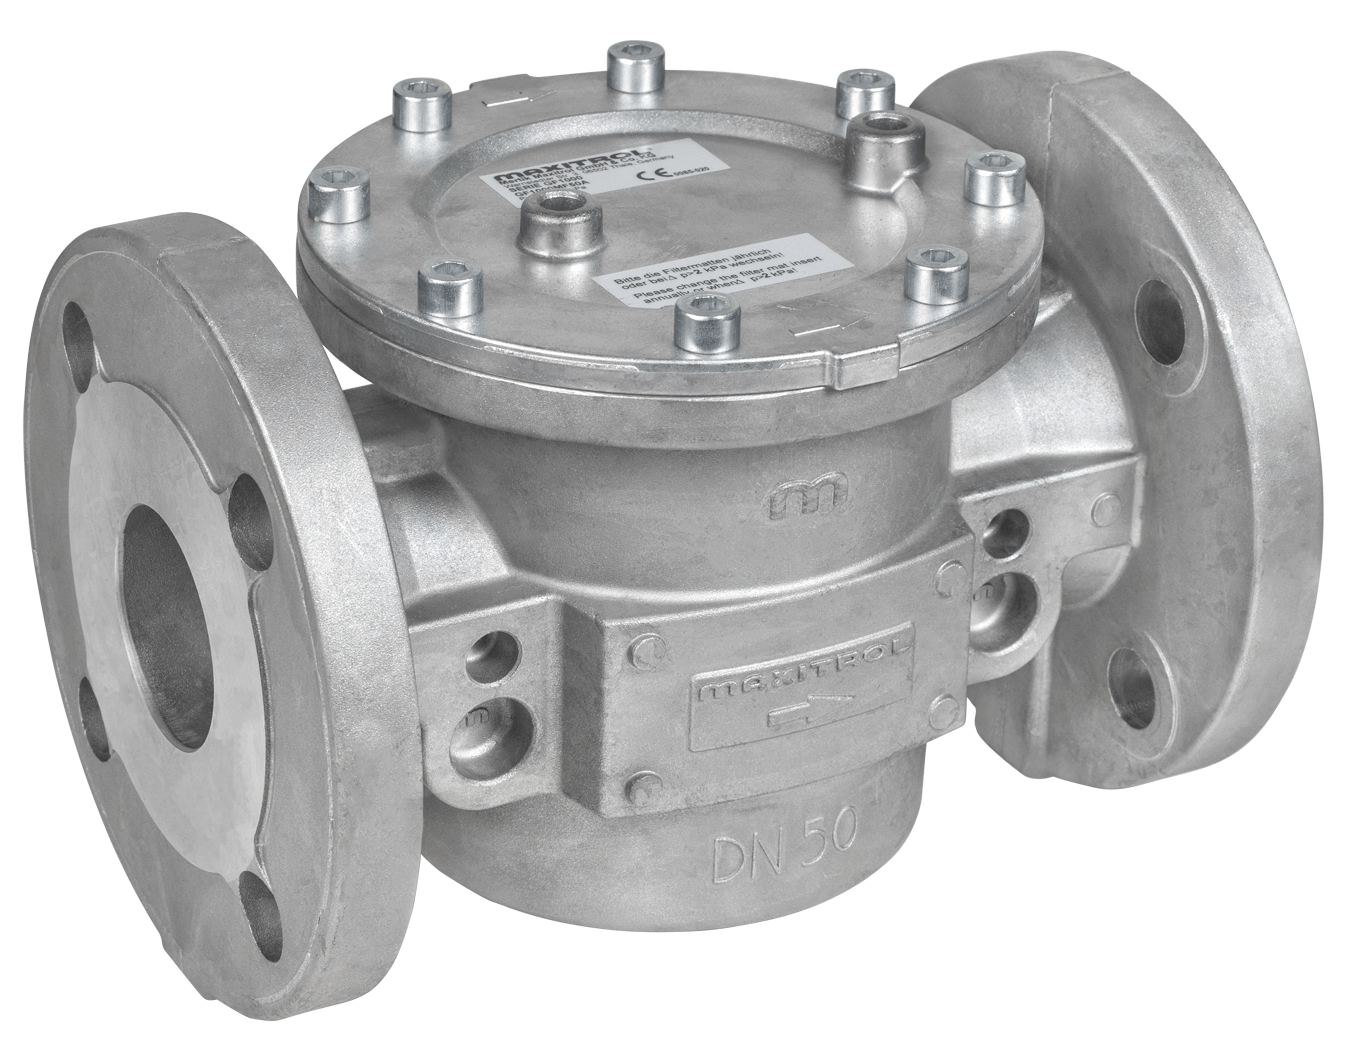 GF1000 – Gas Filter with Flange Connection